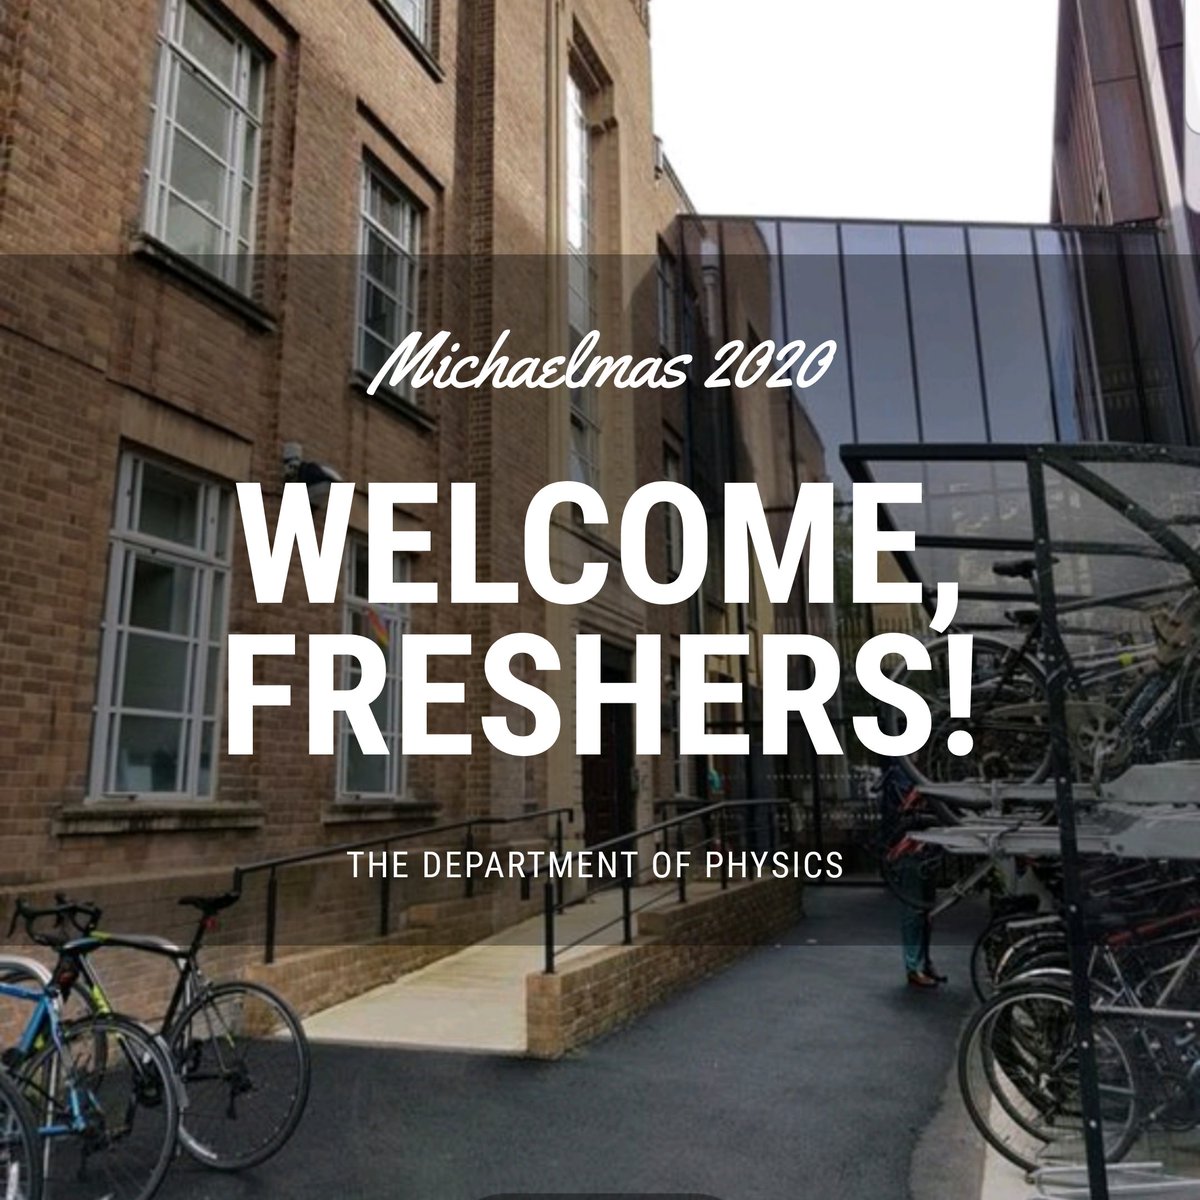 Welcome to all our new students! 
#Michaelmas #Freshers2020 #physics #studentlife #university